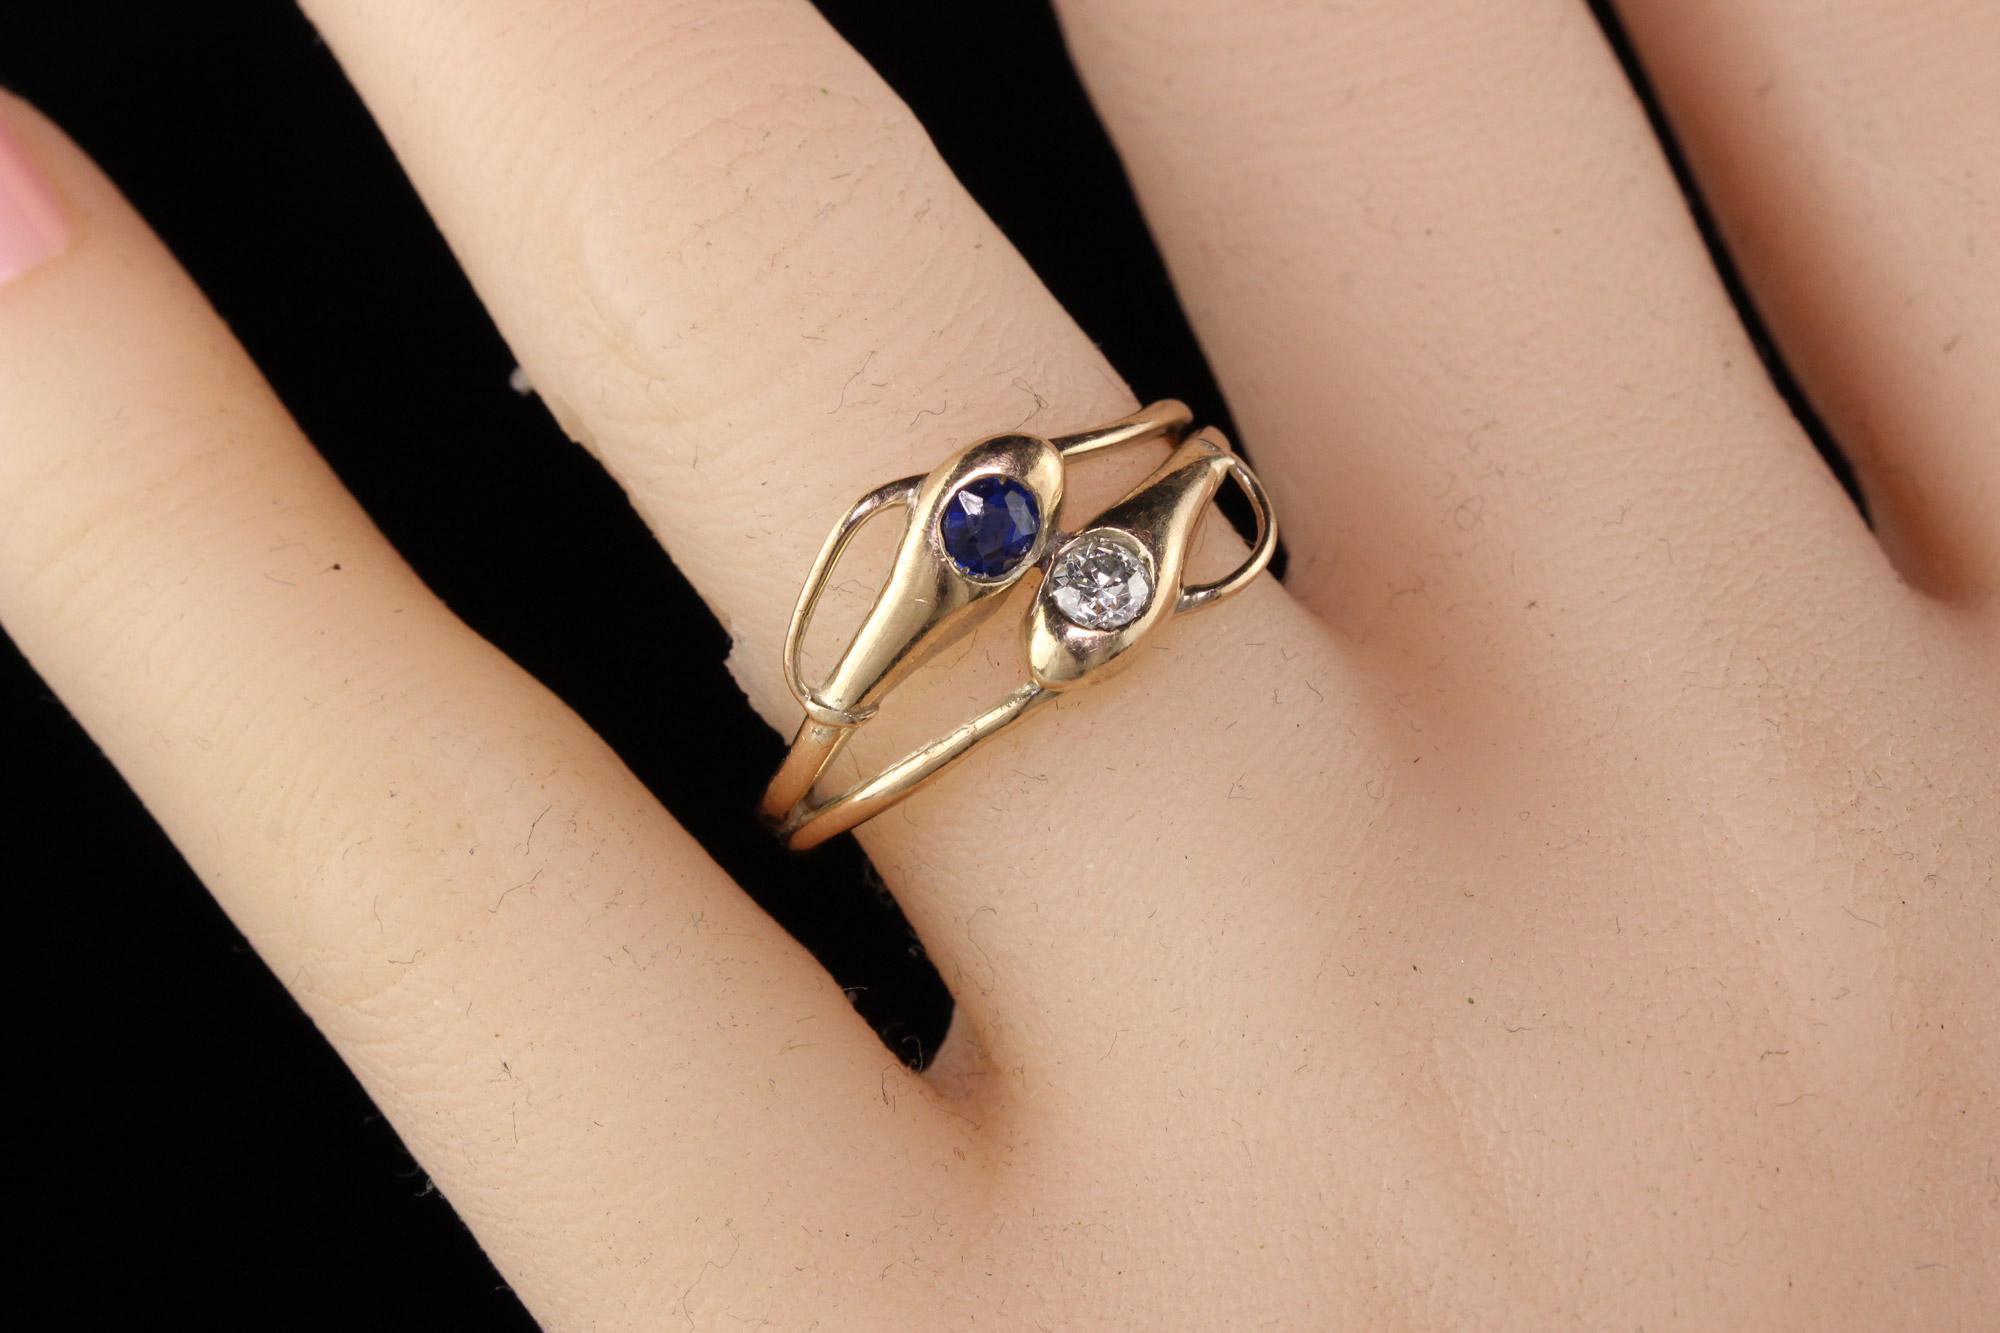 Antique Victorian 12 Karat Yellow Gold Diamond and Sapphire Double Snake Ring 1